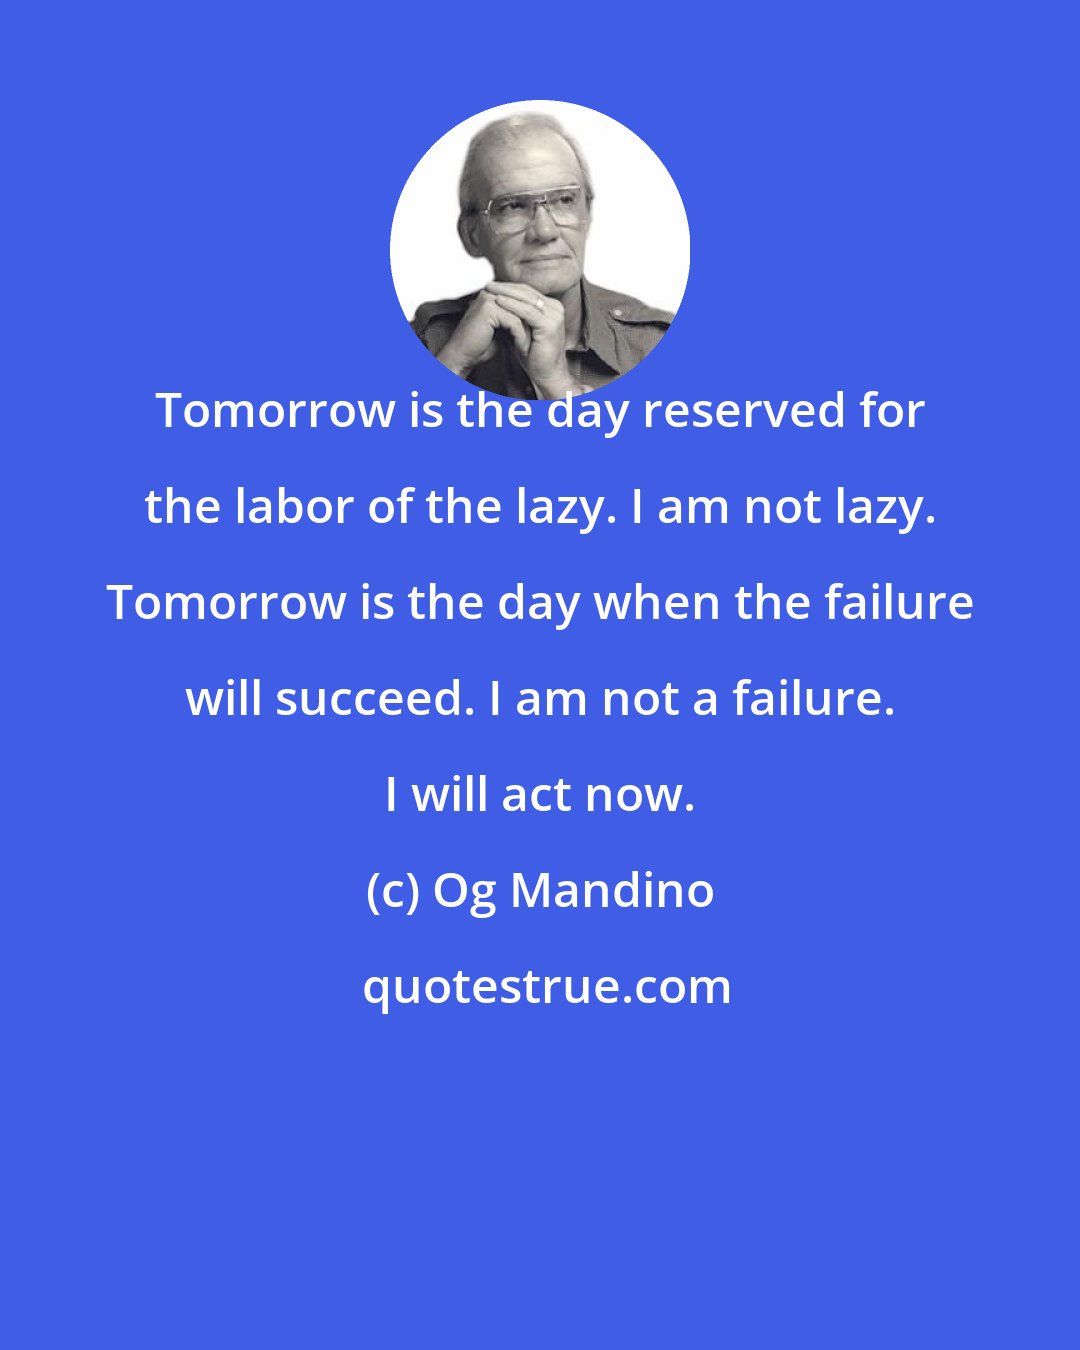 Og Mandino: Tomorrow is the day reserved for the labor of the lazy. I am not lazy. Tomorrow is the day when the failure will succeed. I am not a failure. I will act now.